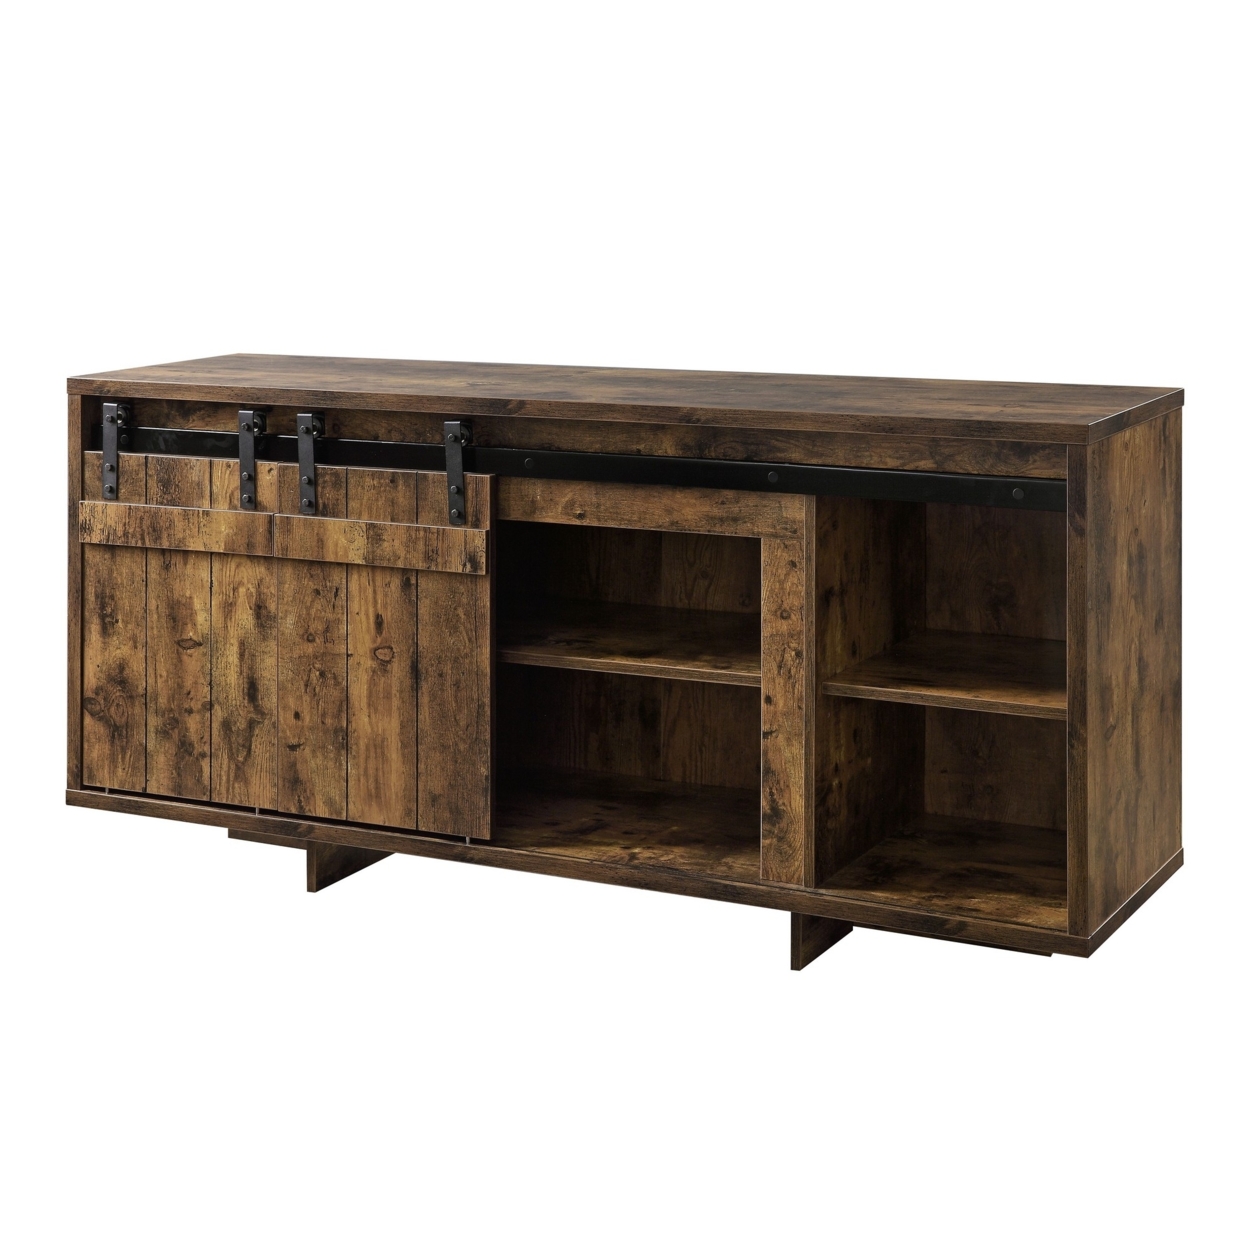 60 Inches Wooden TV Stand With 2 Barn Sliding Doors, Rustic Brown- Saltoro Sherpi